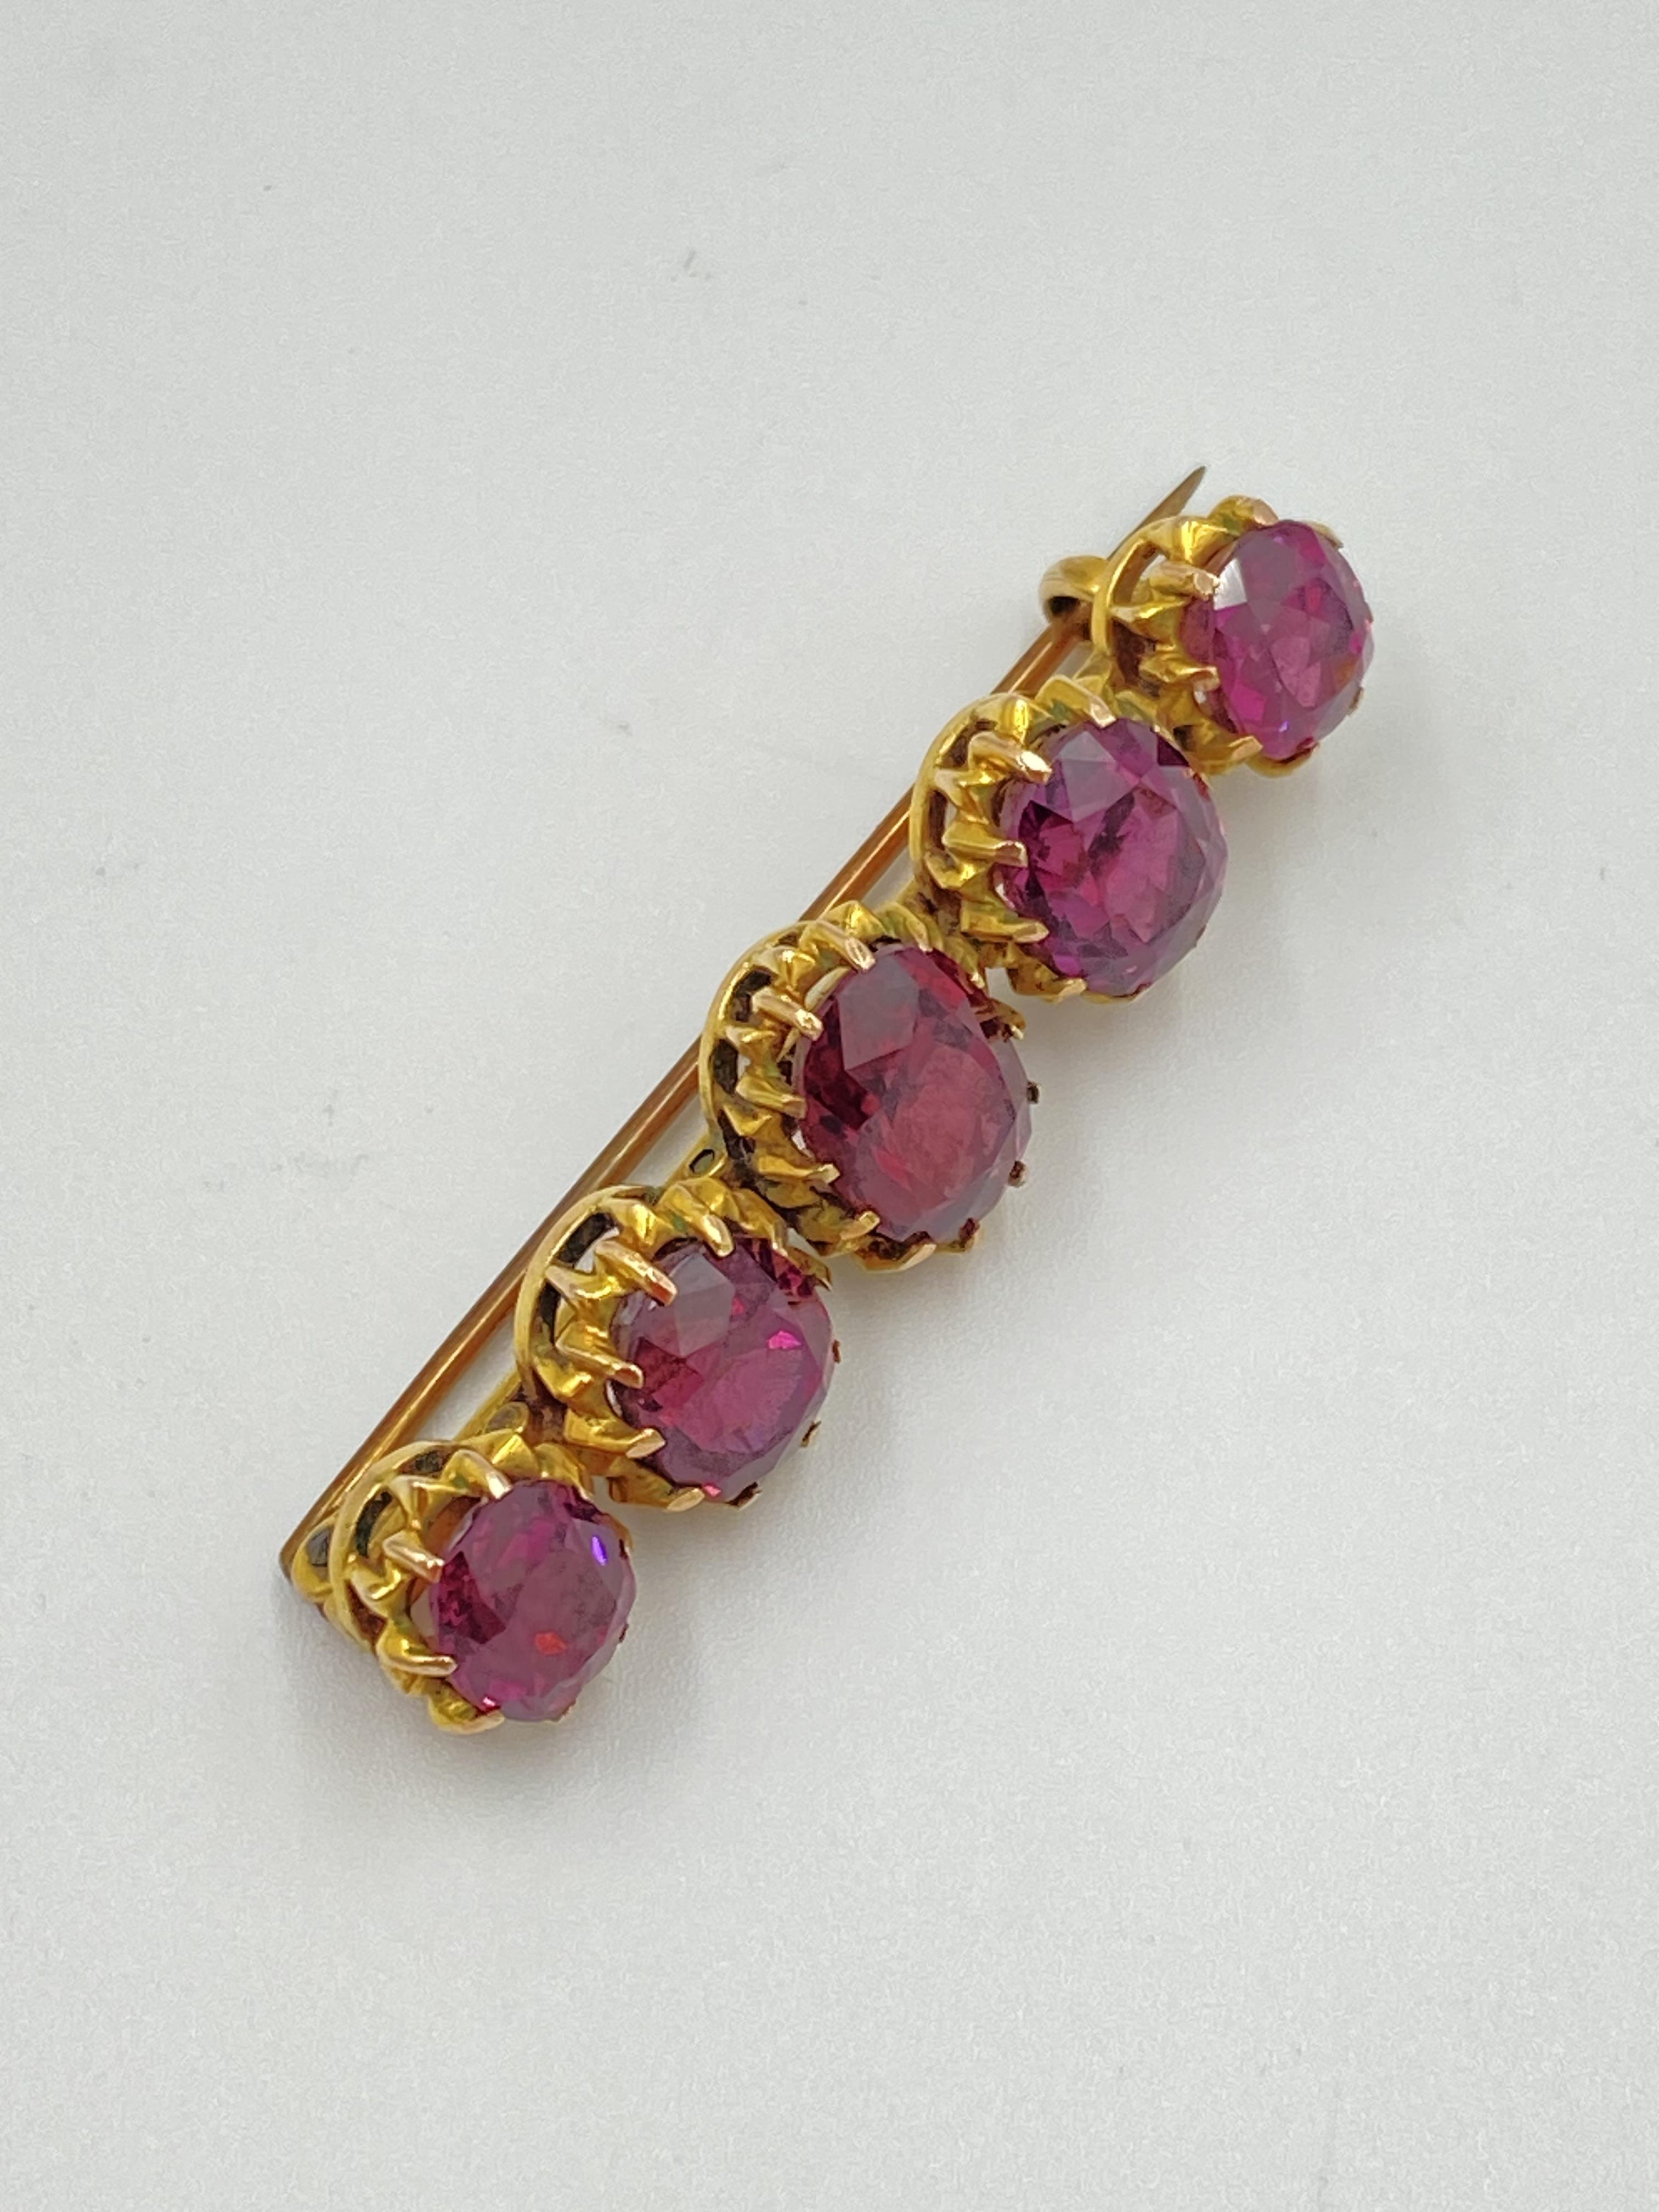 9ct gold and tourmaline brooch